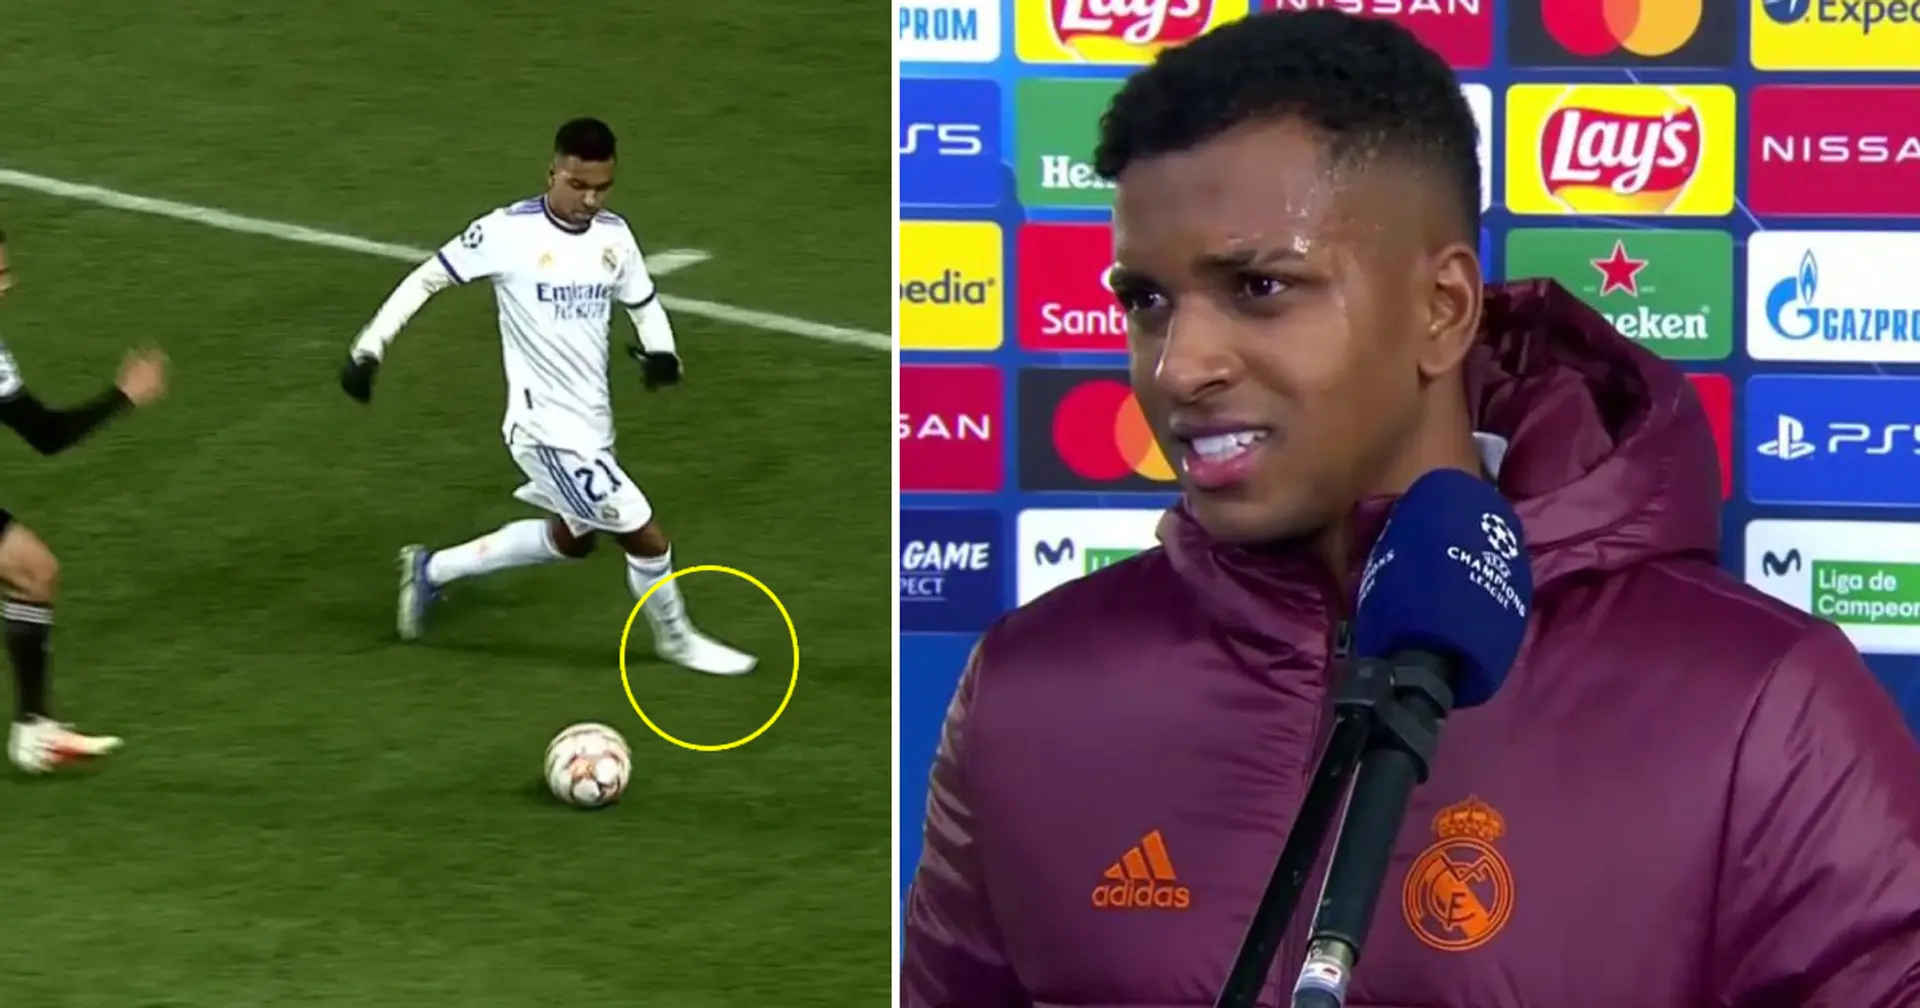 Caught on camera: Rodrygo continues to dribble despite losing his shoe